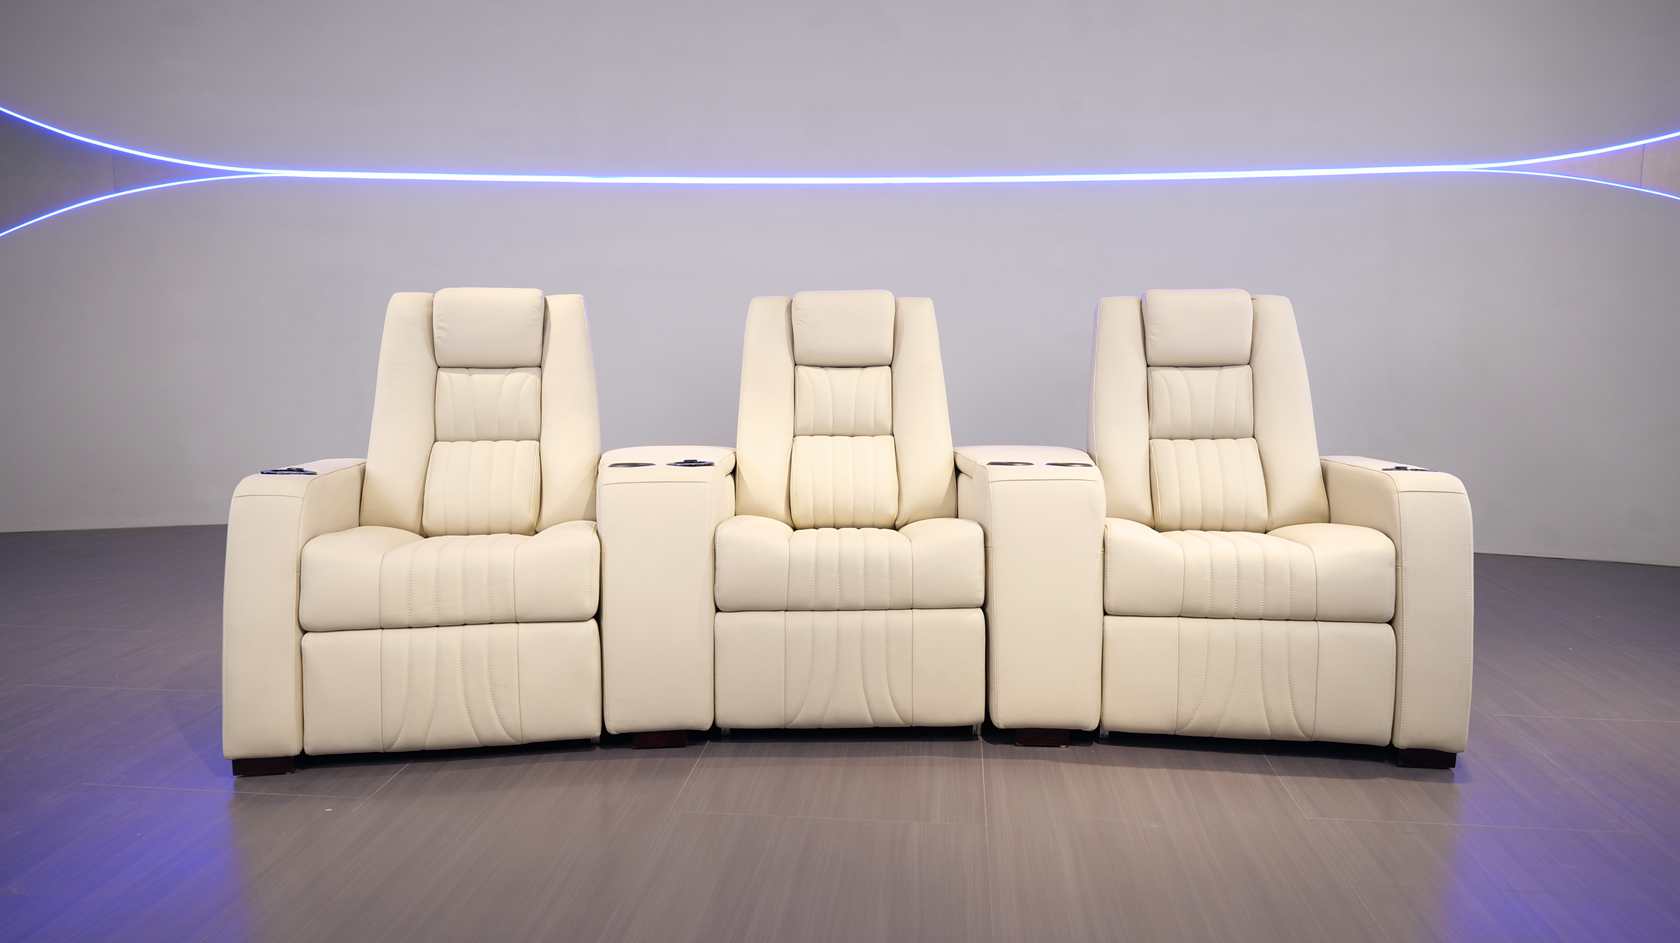 Exquisite Choices in Home Theater Sofa Products——HAHLO